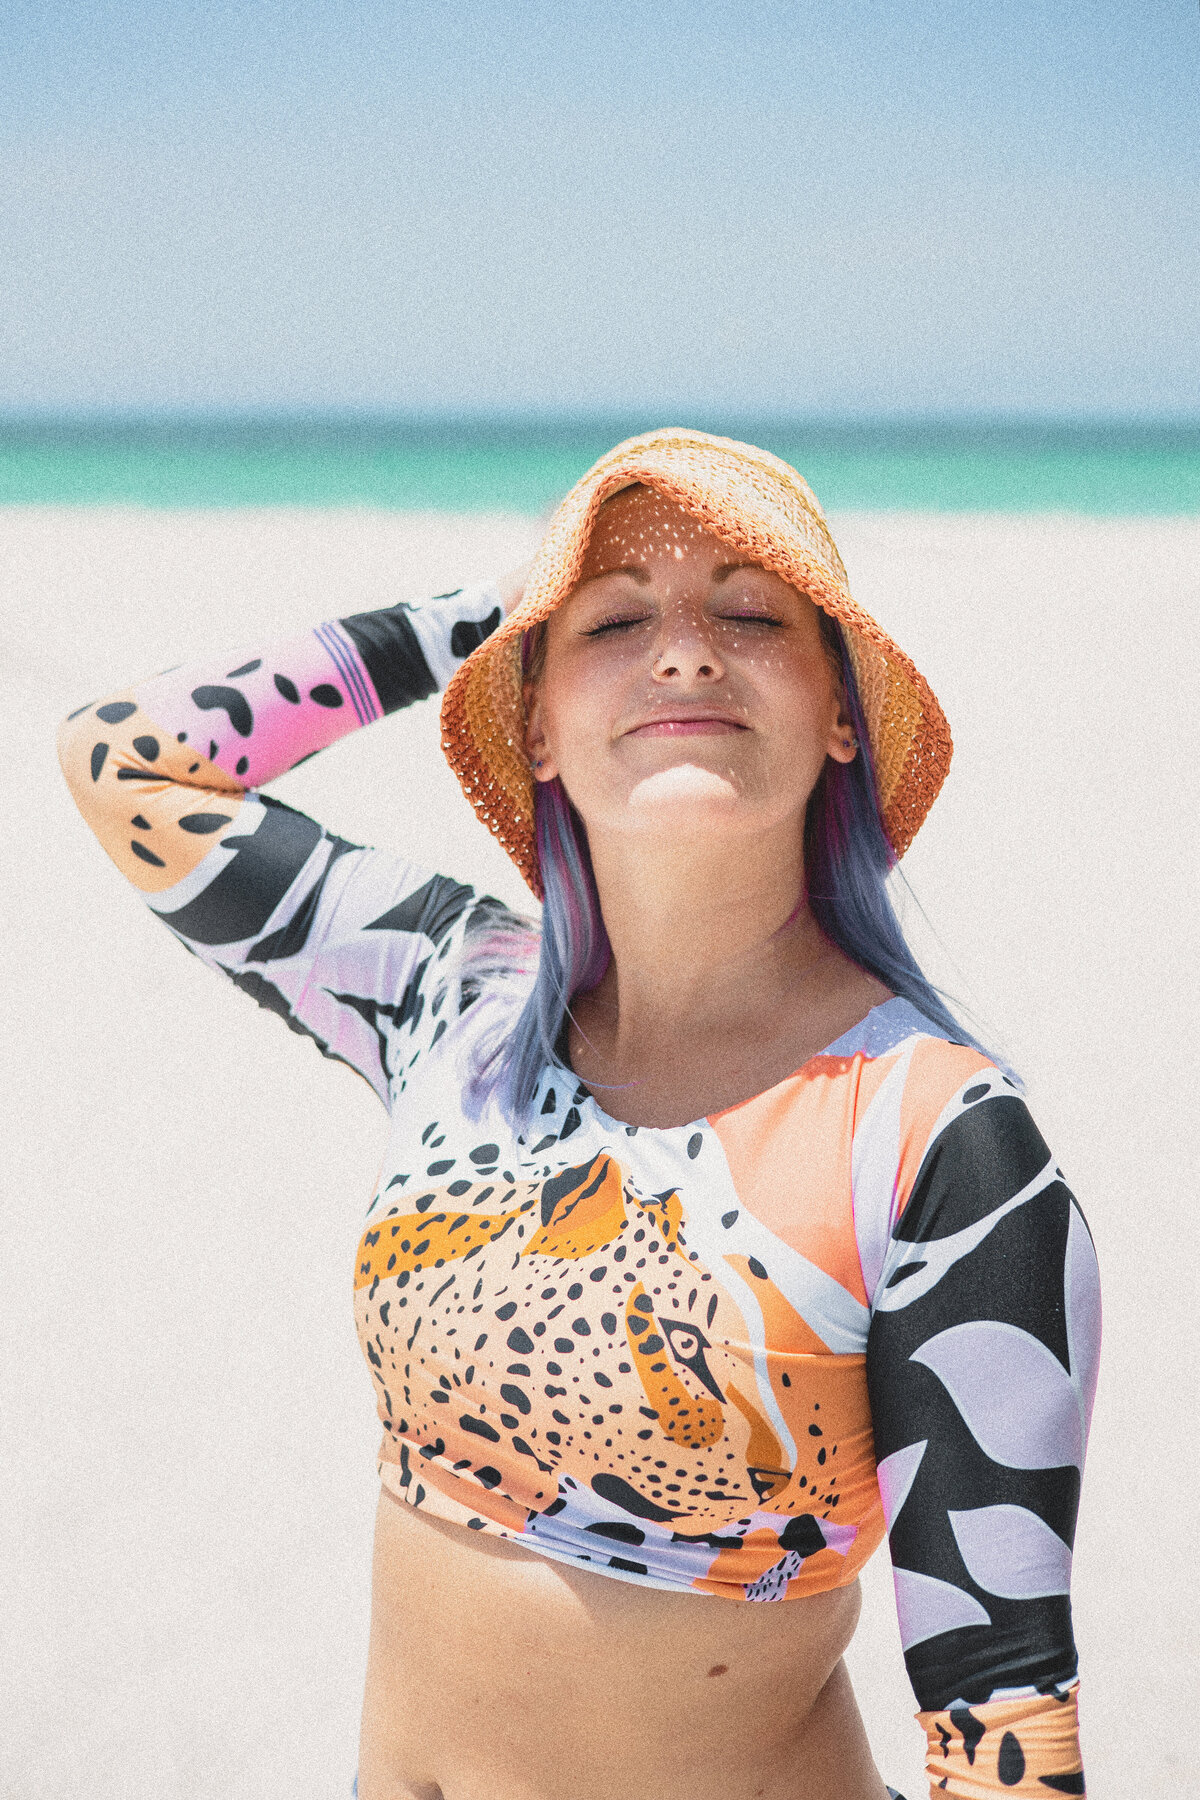 Model wearing woven bucket hat and surf rash guard standing in the sun